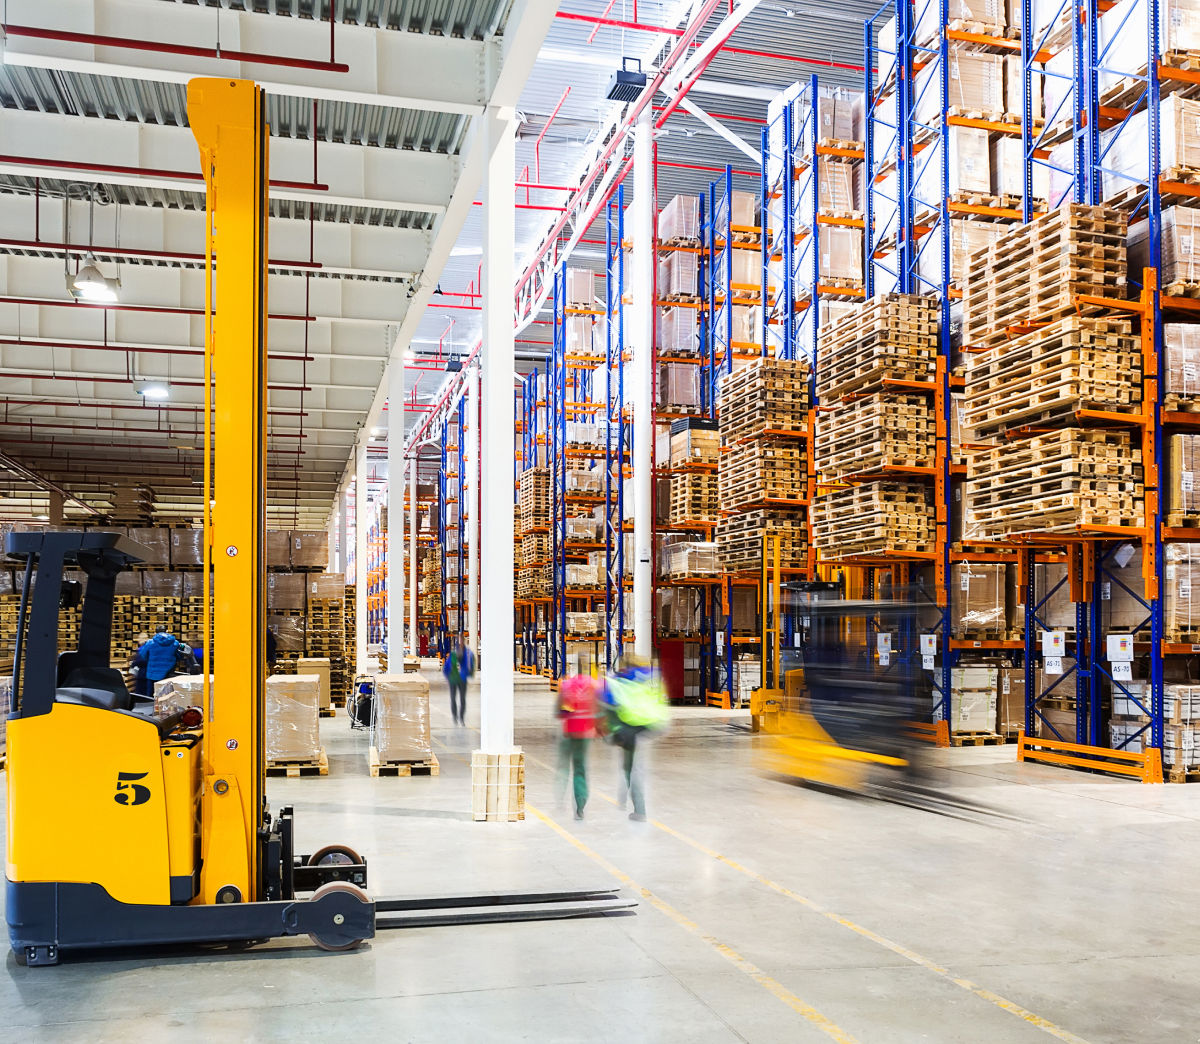 Interior of a busy warehouse with shelves of goods and a stationary forklift.